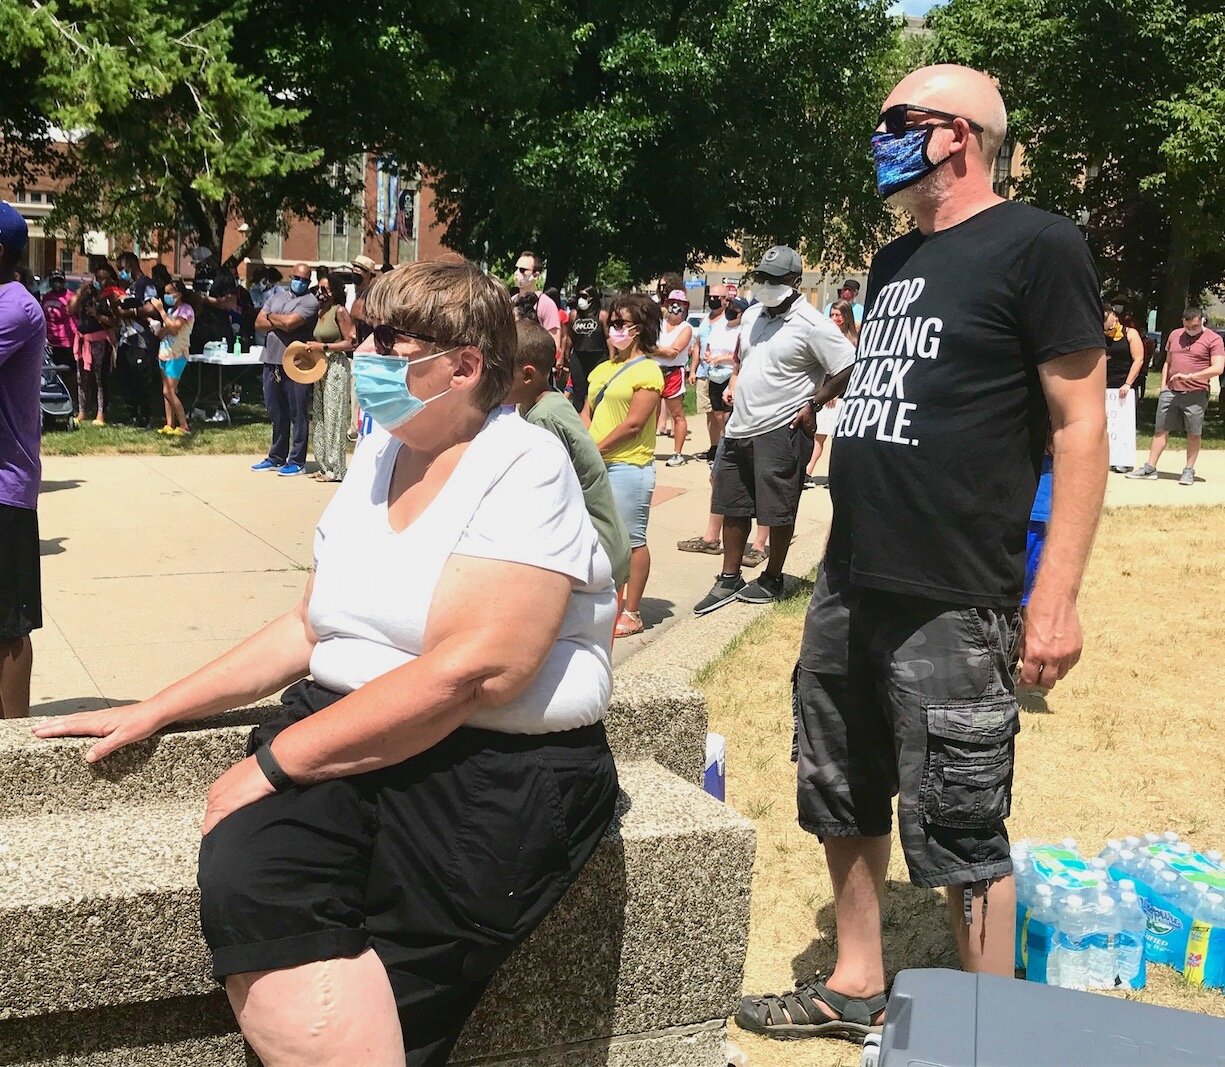 Police response to the civil unrest and protests that occurred last summer are the focus of a 111-page report by OIR Group. Shown here is a July 11 gathering in Bronson Park in downtown Kalamazoo.